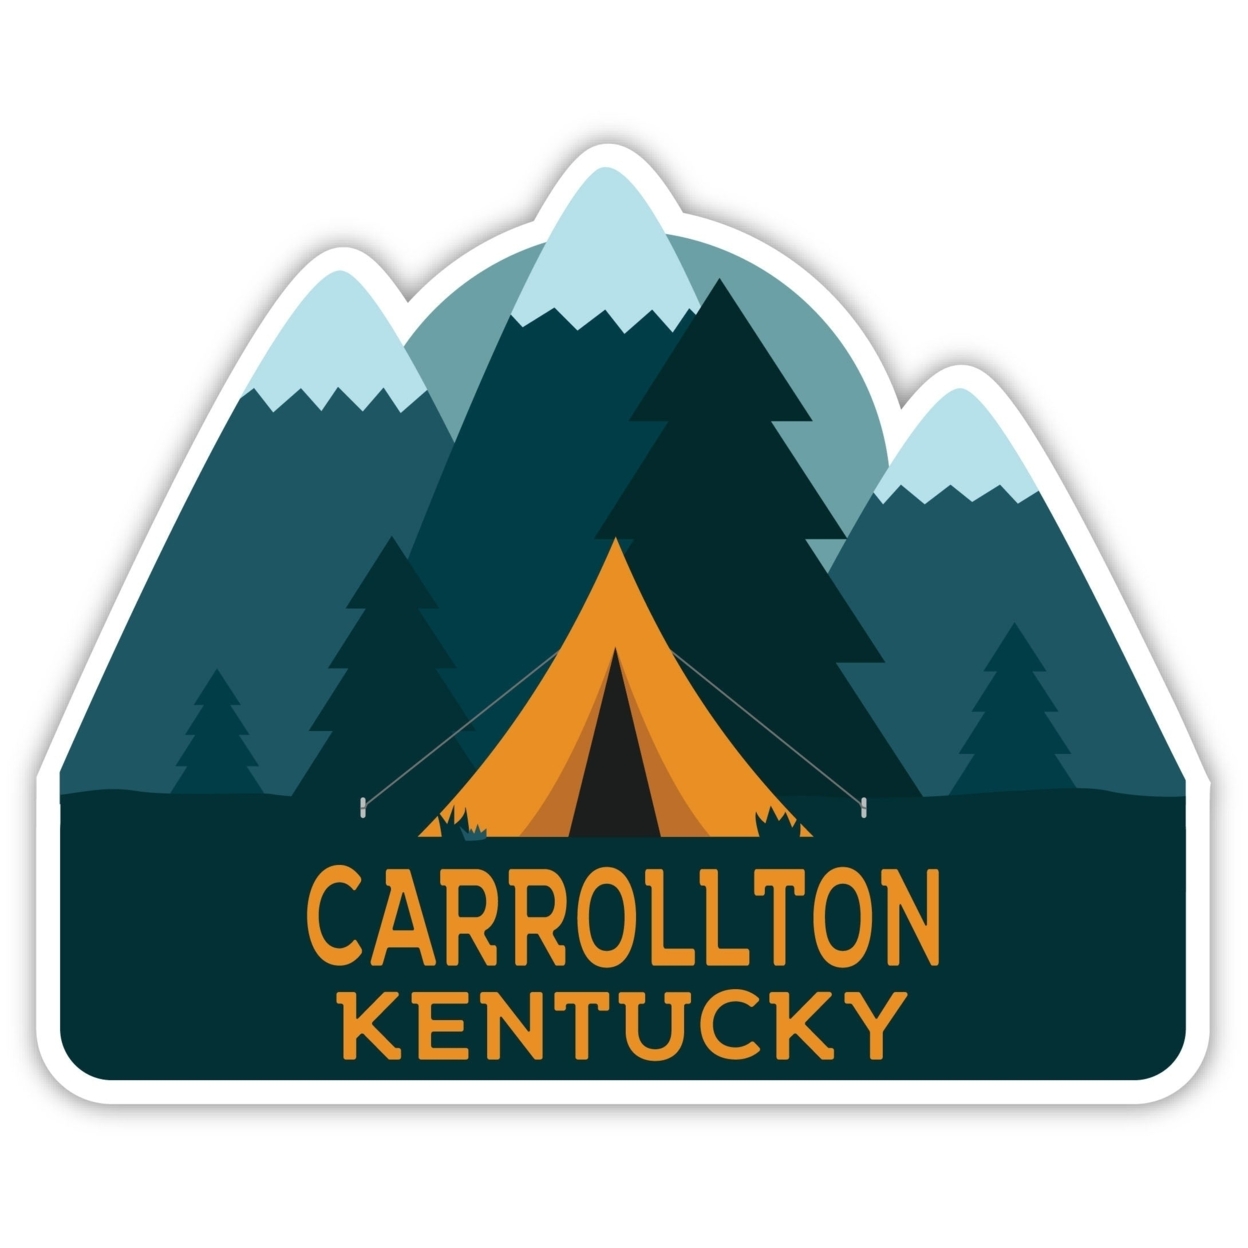 Carrollton Kentucky Souvenir Decorative Stickers (Choose Theme And Size) - 4-Pack, 8-Inch, Tent